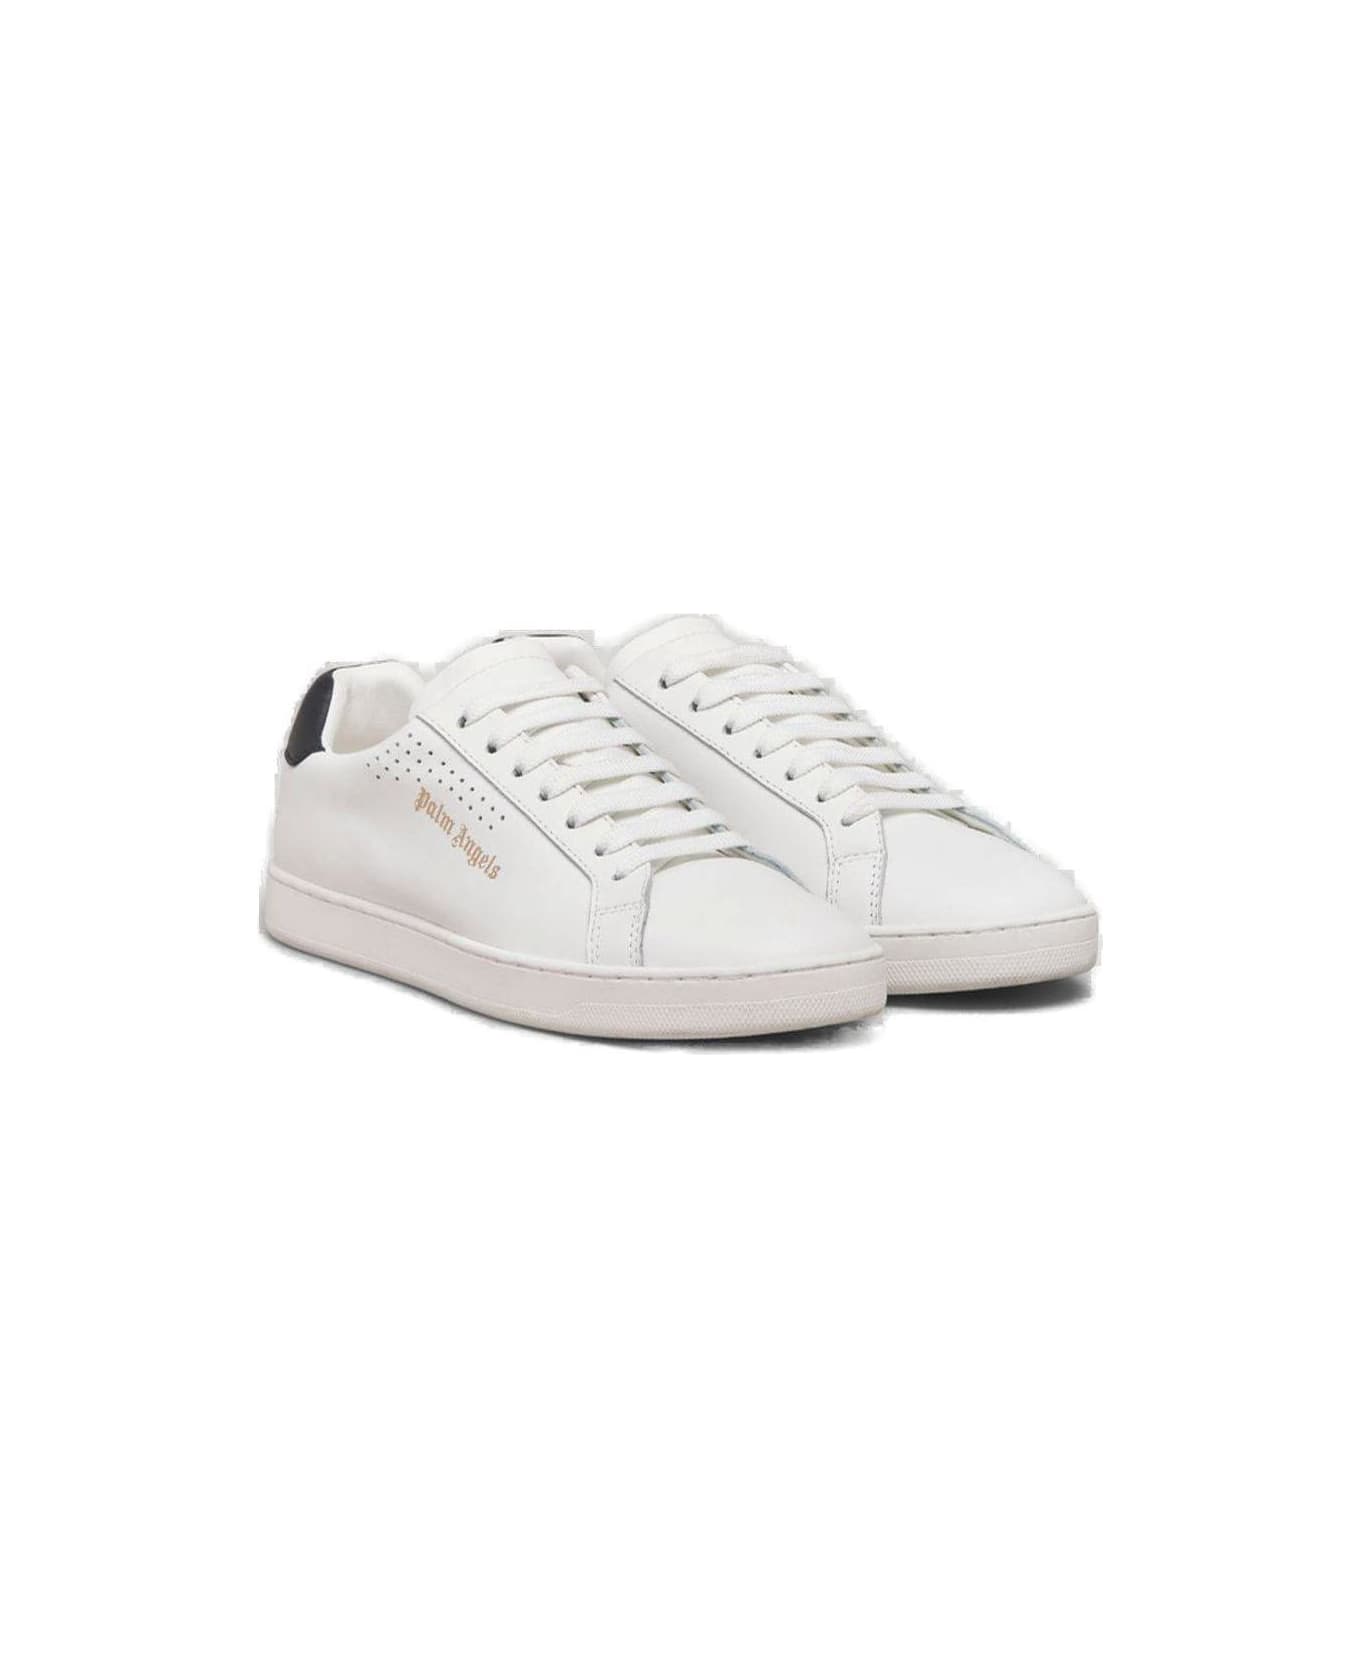 Palm Angels Leather Logo Sneakers - White